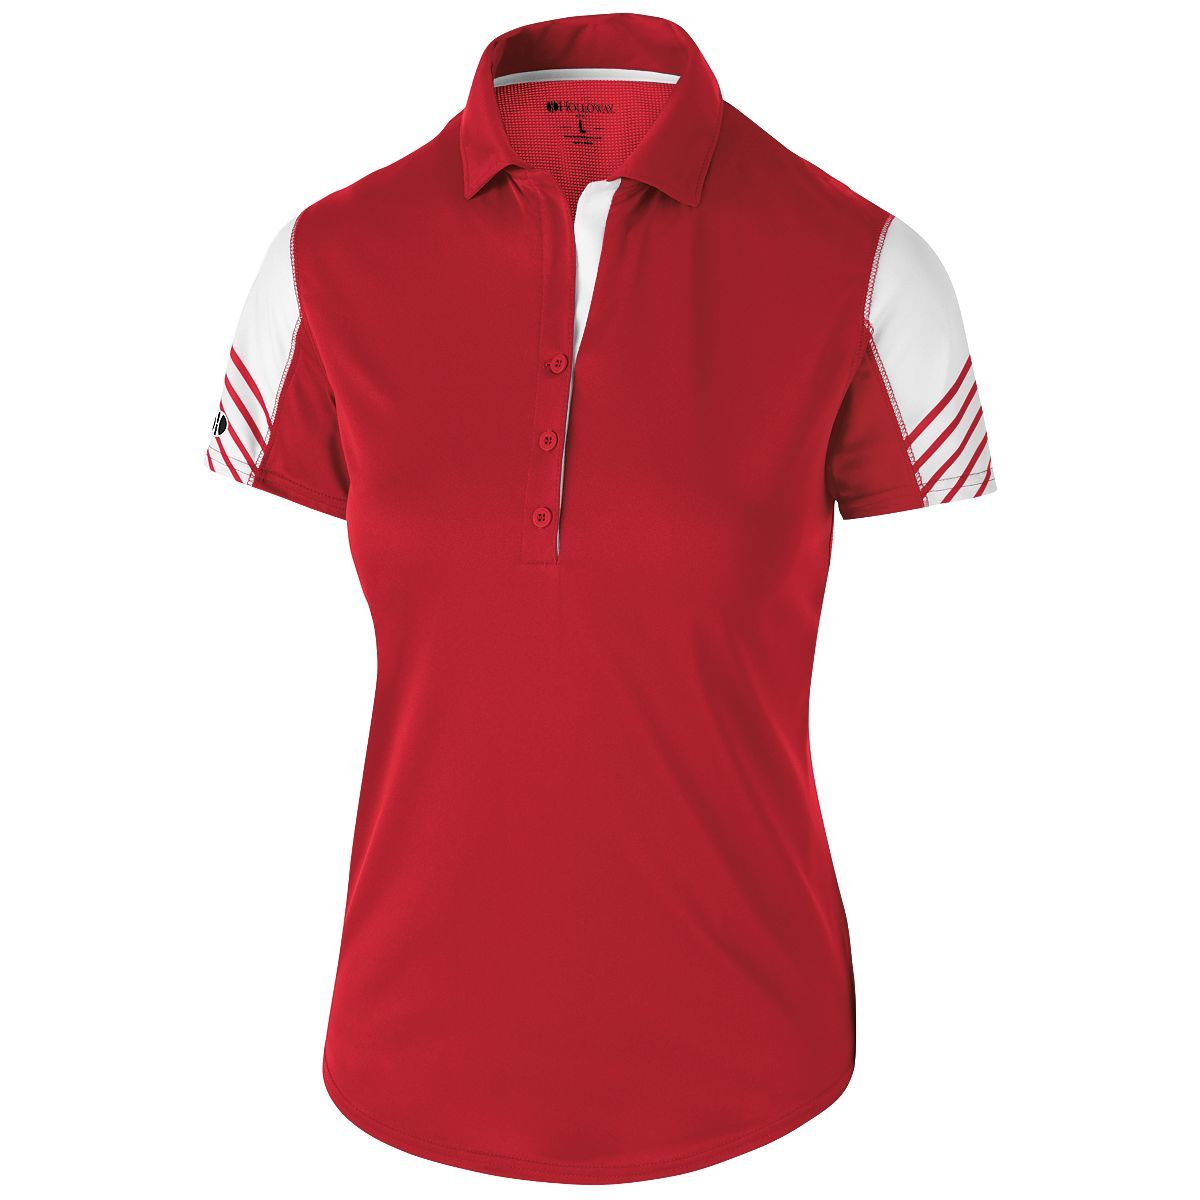 Holloway Ladies Arc Polo in Scarlet/White  -Part of the Ladies, Ladies-Polo, Polos, Holloway, Shirts product lines at KanaleyCreations.com